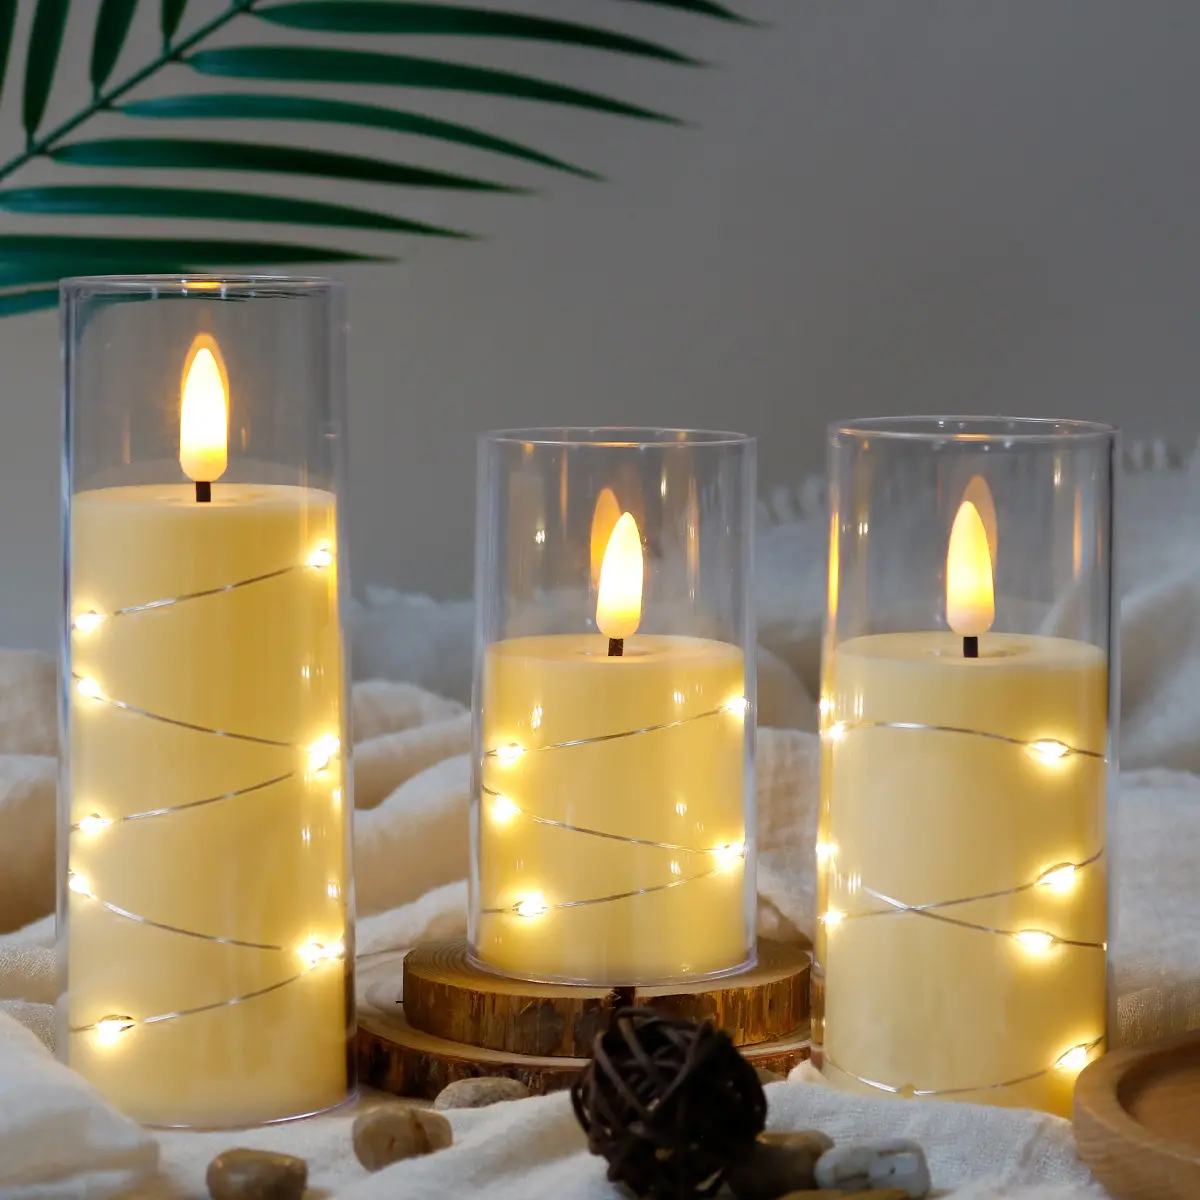 Set 3pcs led candles transparent glass wedding decor candles lights flickering head luxury led candles light with string light